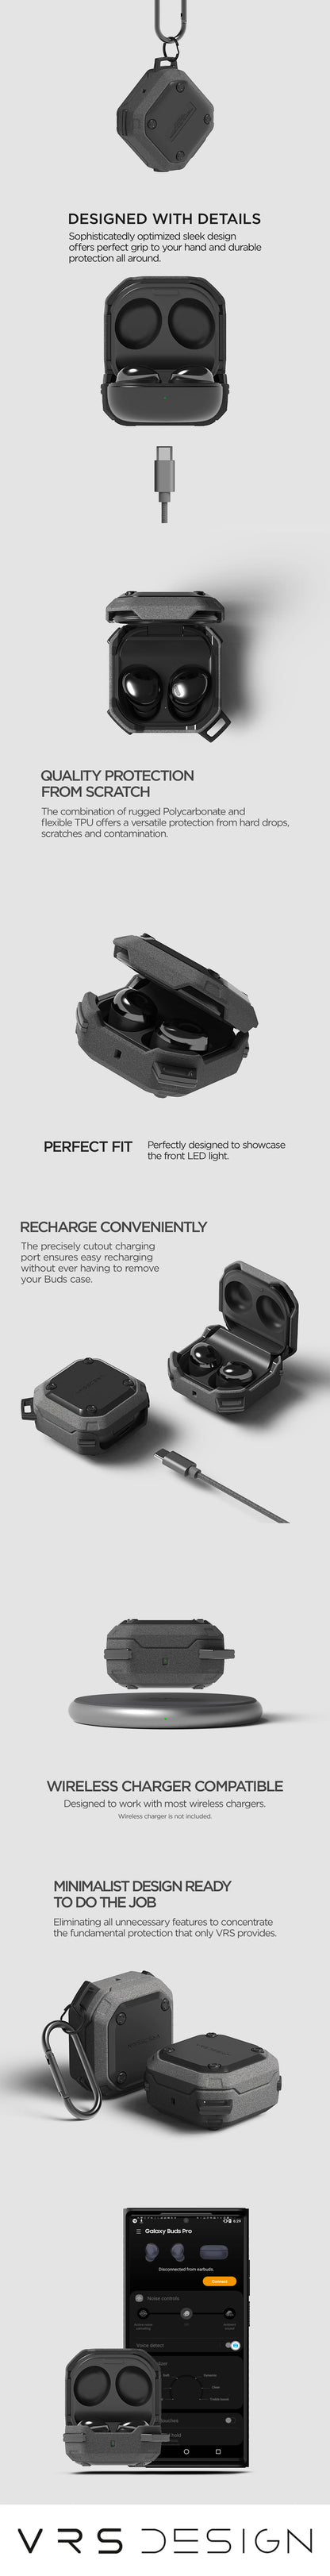 Samsung Galaxy Buds Pro Modern lightweight Wireless noise Cancellation case with rugged minimalist durable protection by VRS